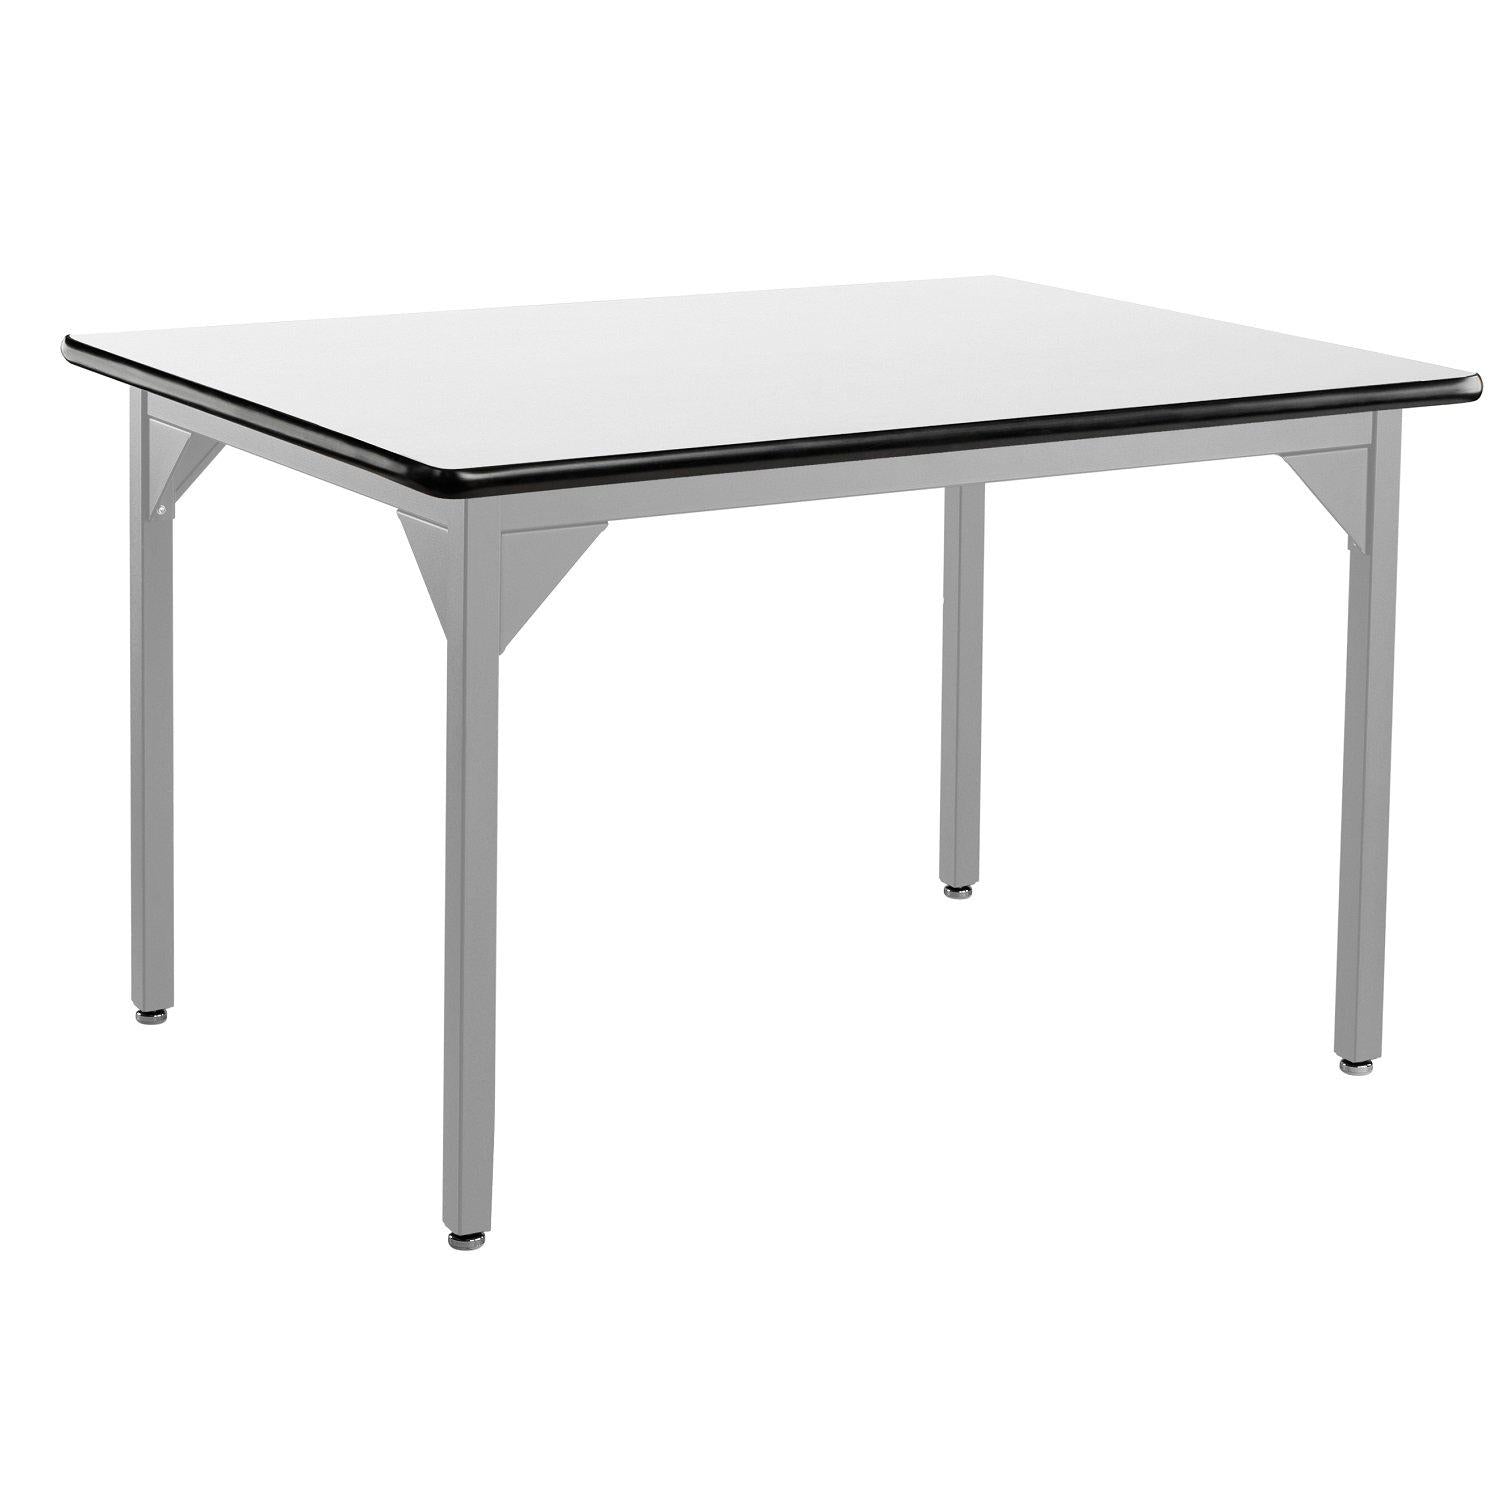 Heavy-Duty Fixed Height Utility Table, Soft Grey Frame, 36" x 48", Whiteboard High-Pressure Laminate Top